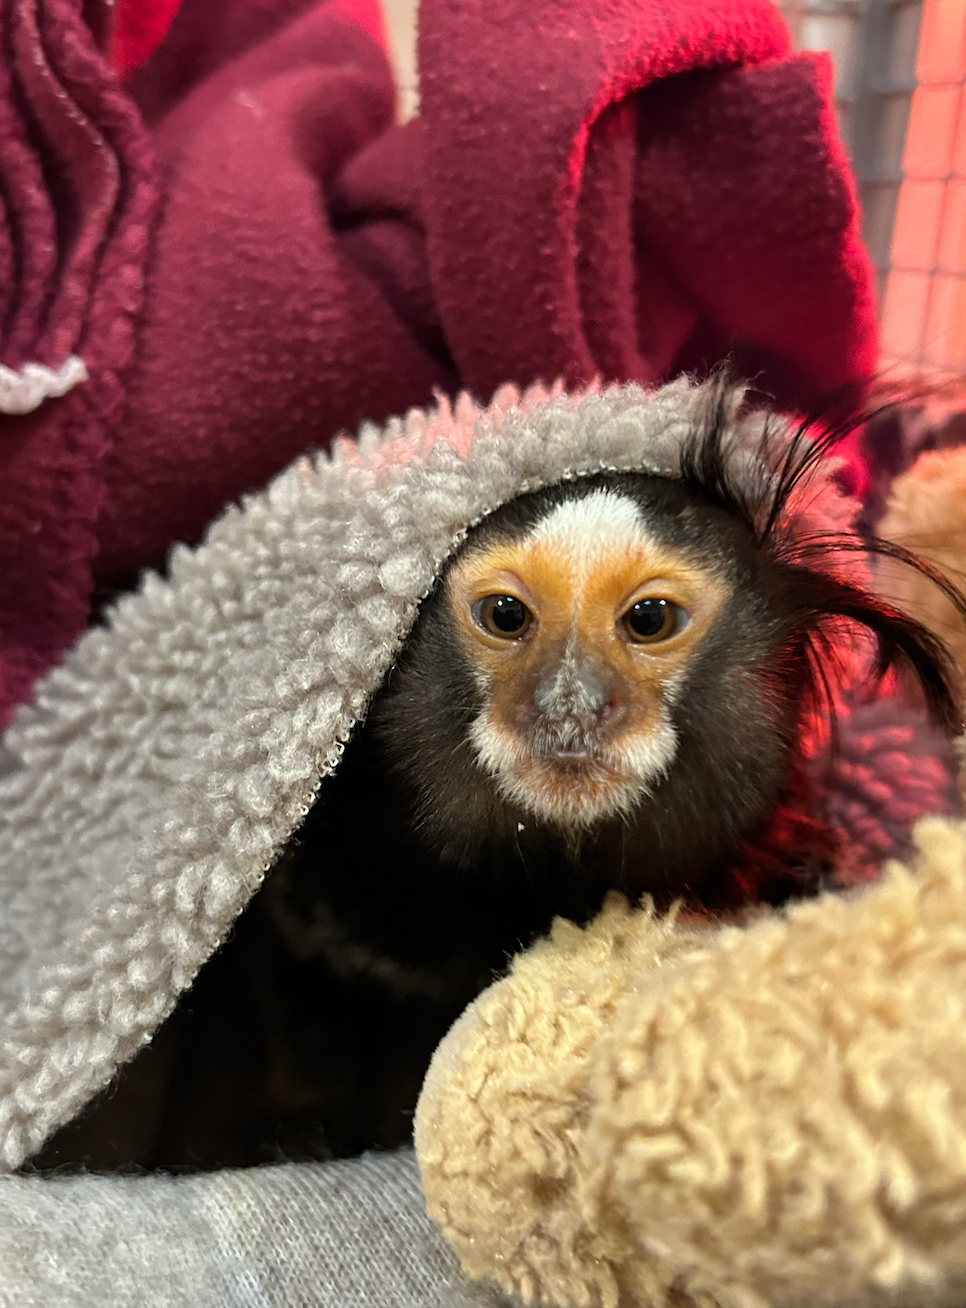 Zoo cares for illegally owned marmoset monkey 